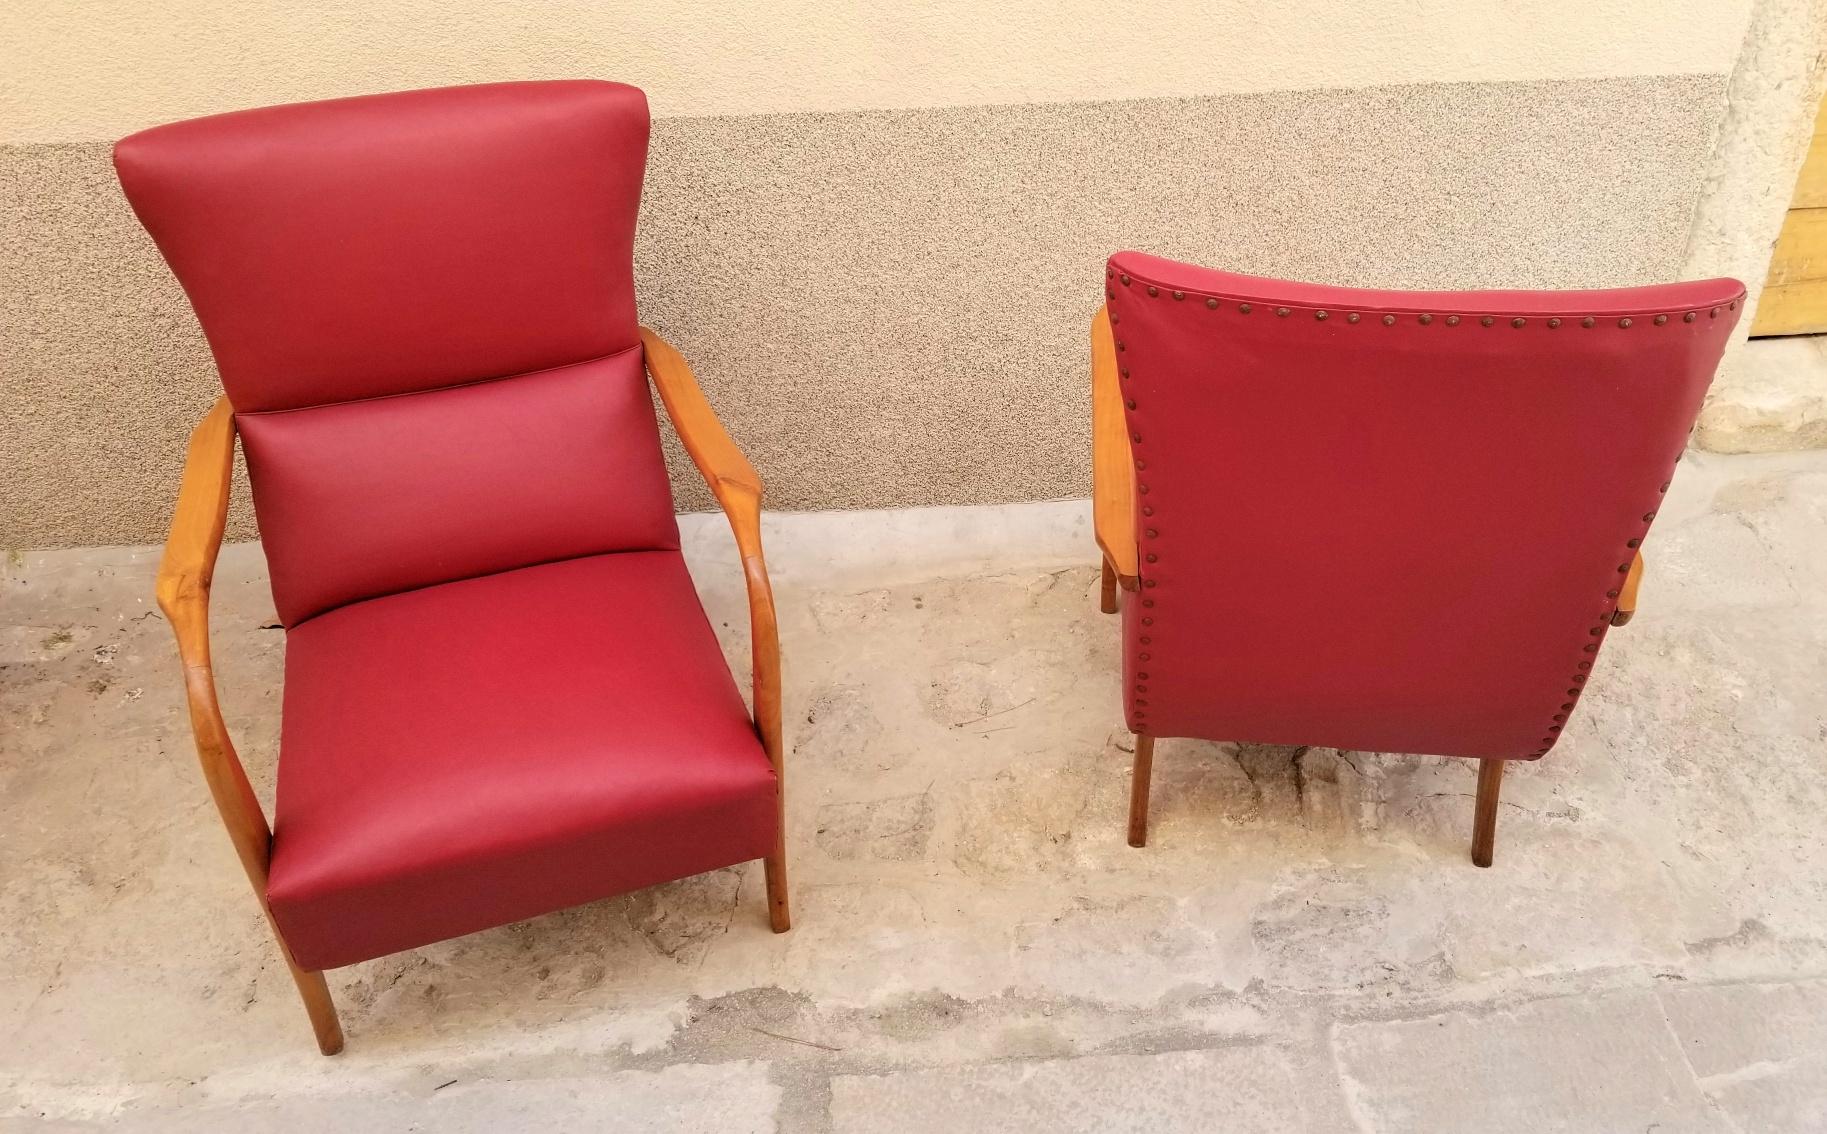 Mid-20th Century Italian Pair of Chairs For Sale